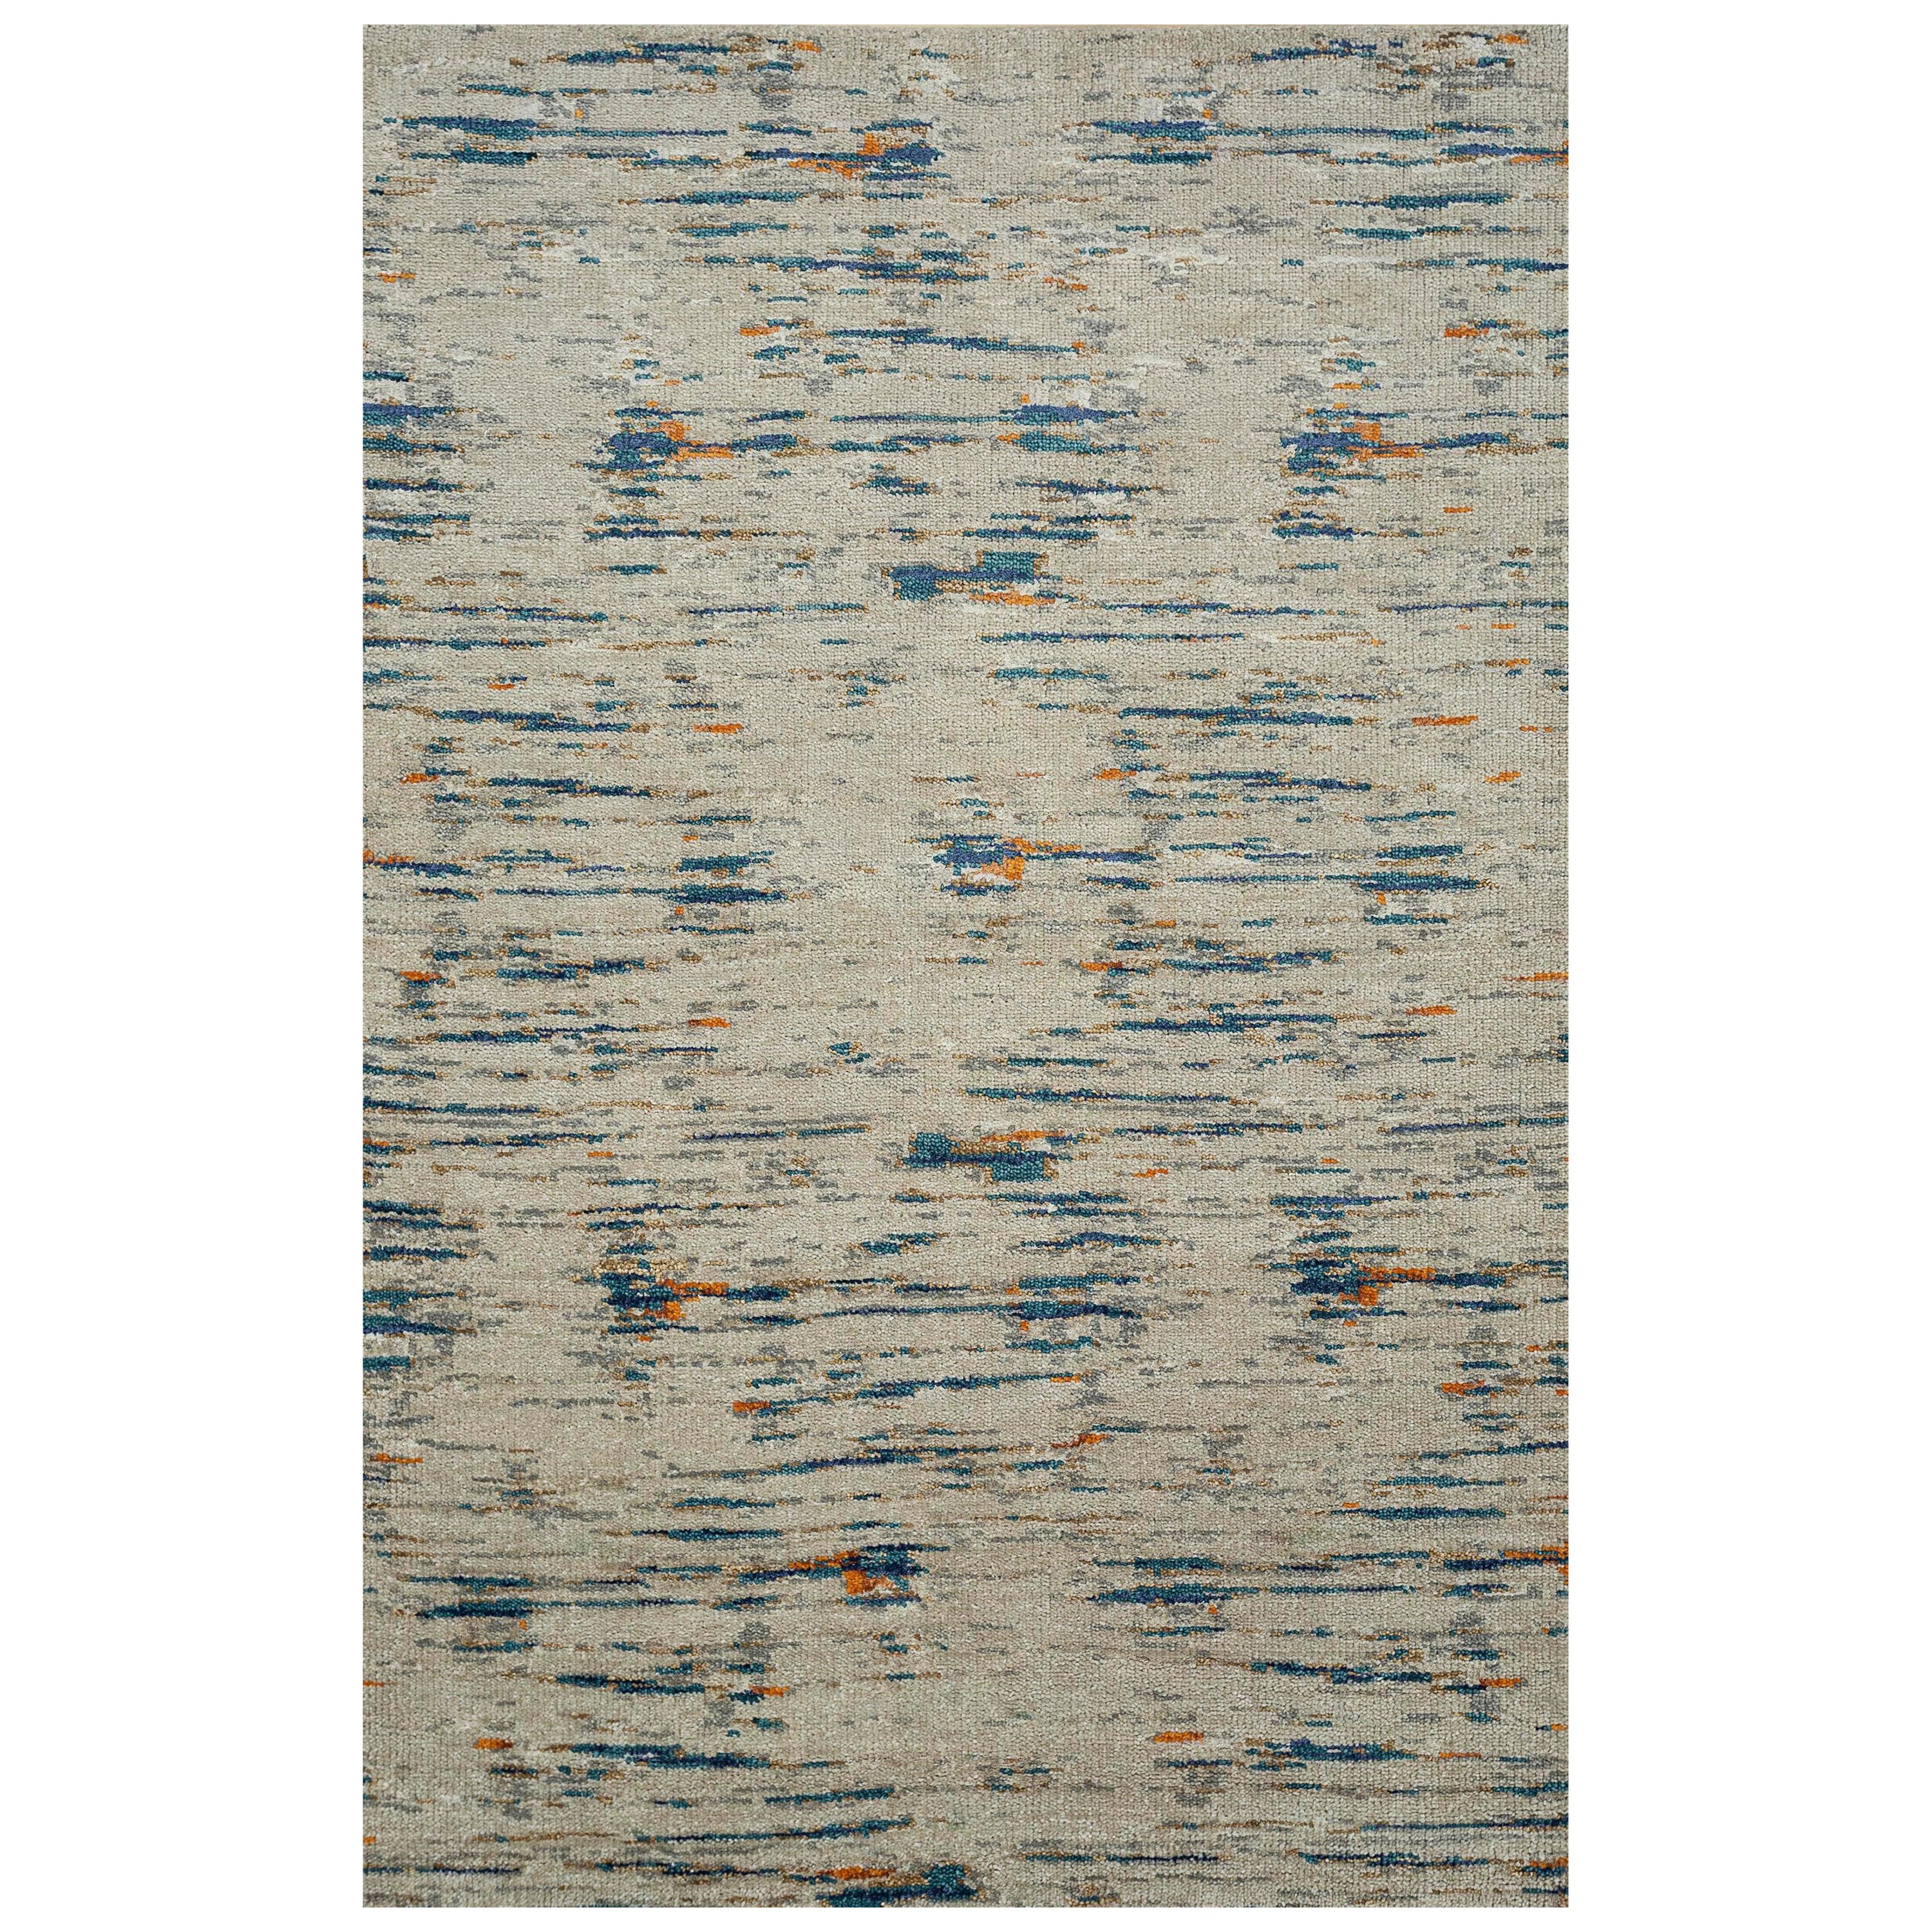 Vintage Whispers Antique White Shadow Teal Hand-Knotted Rug